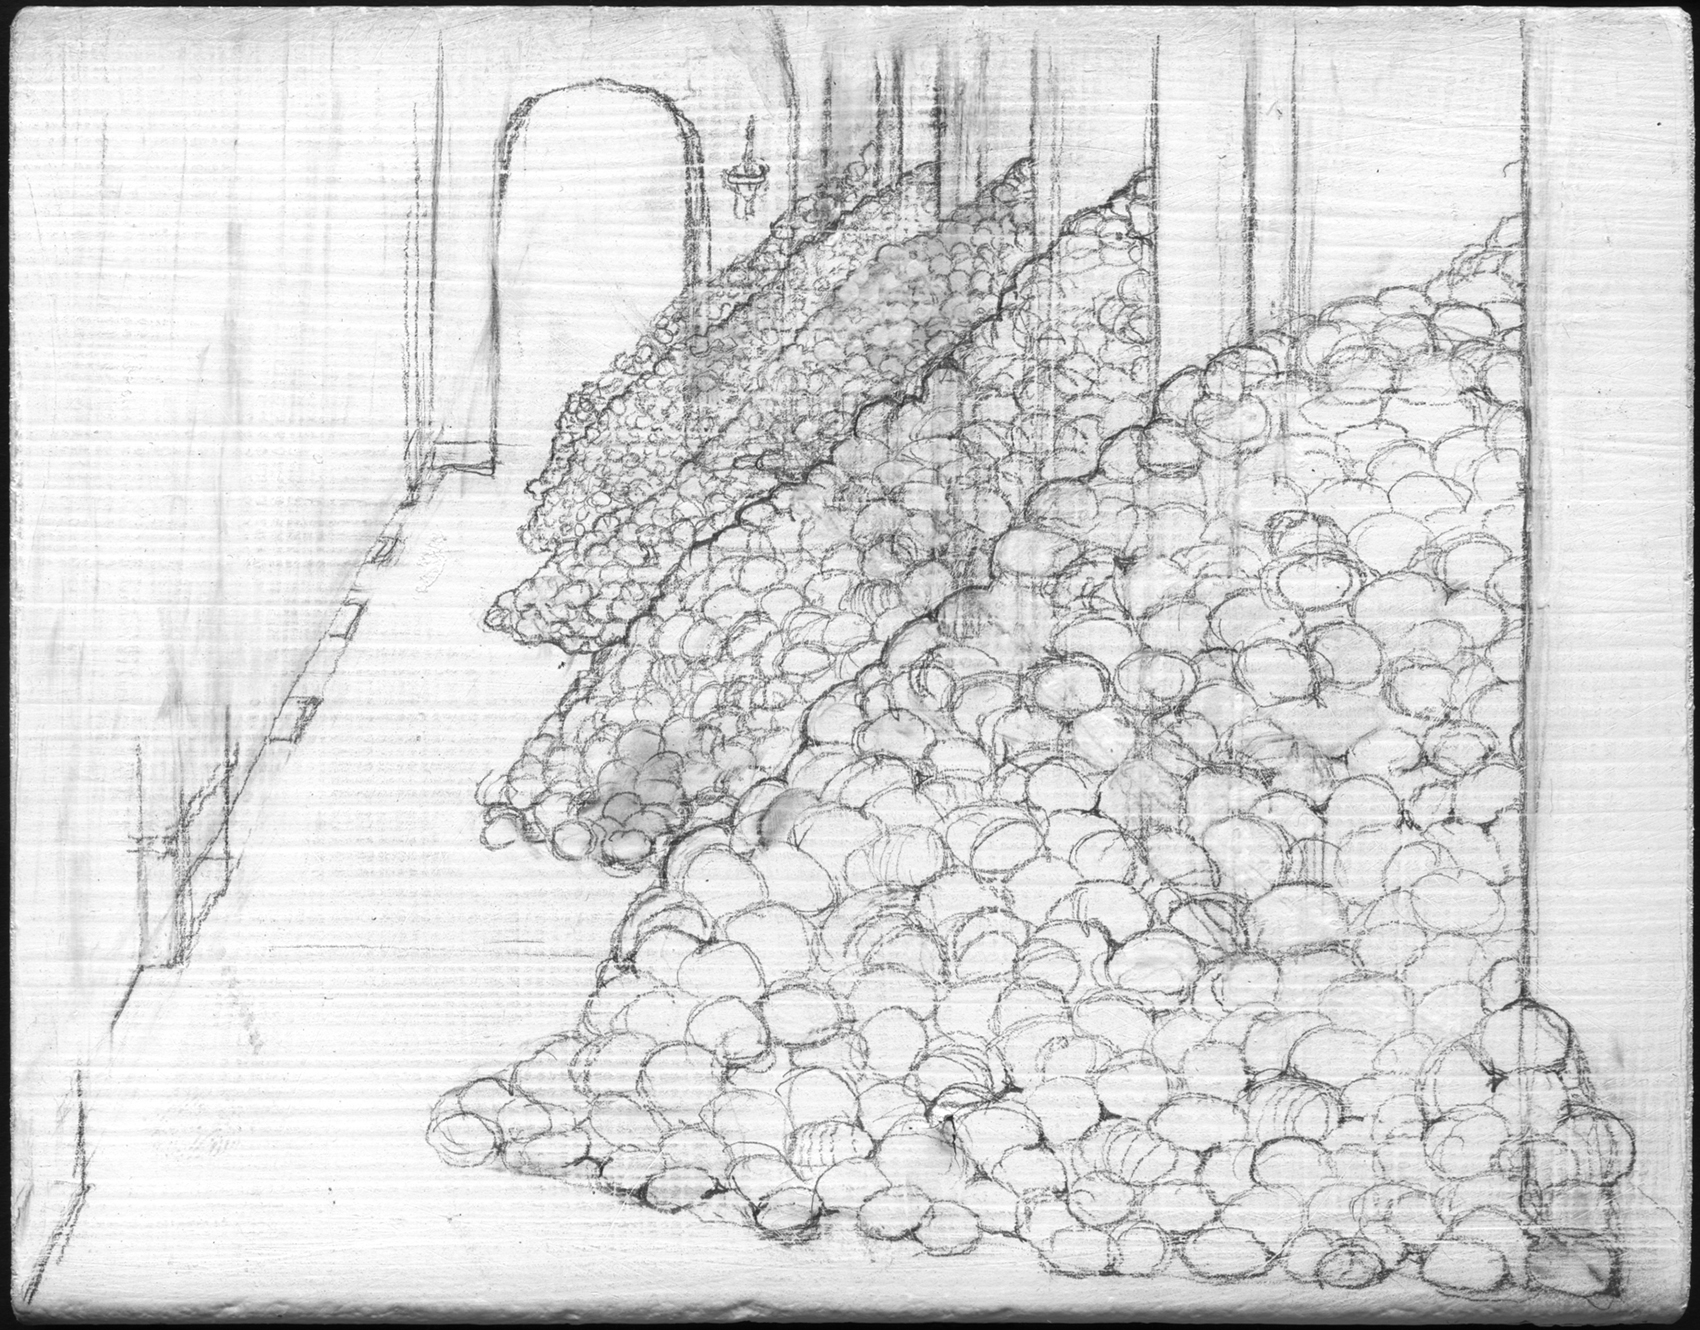    Egg Palace   , 2008,   graphite on gessoed panel, 3 3/4 x 4 3/4 in.  